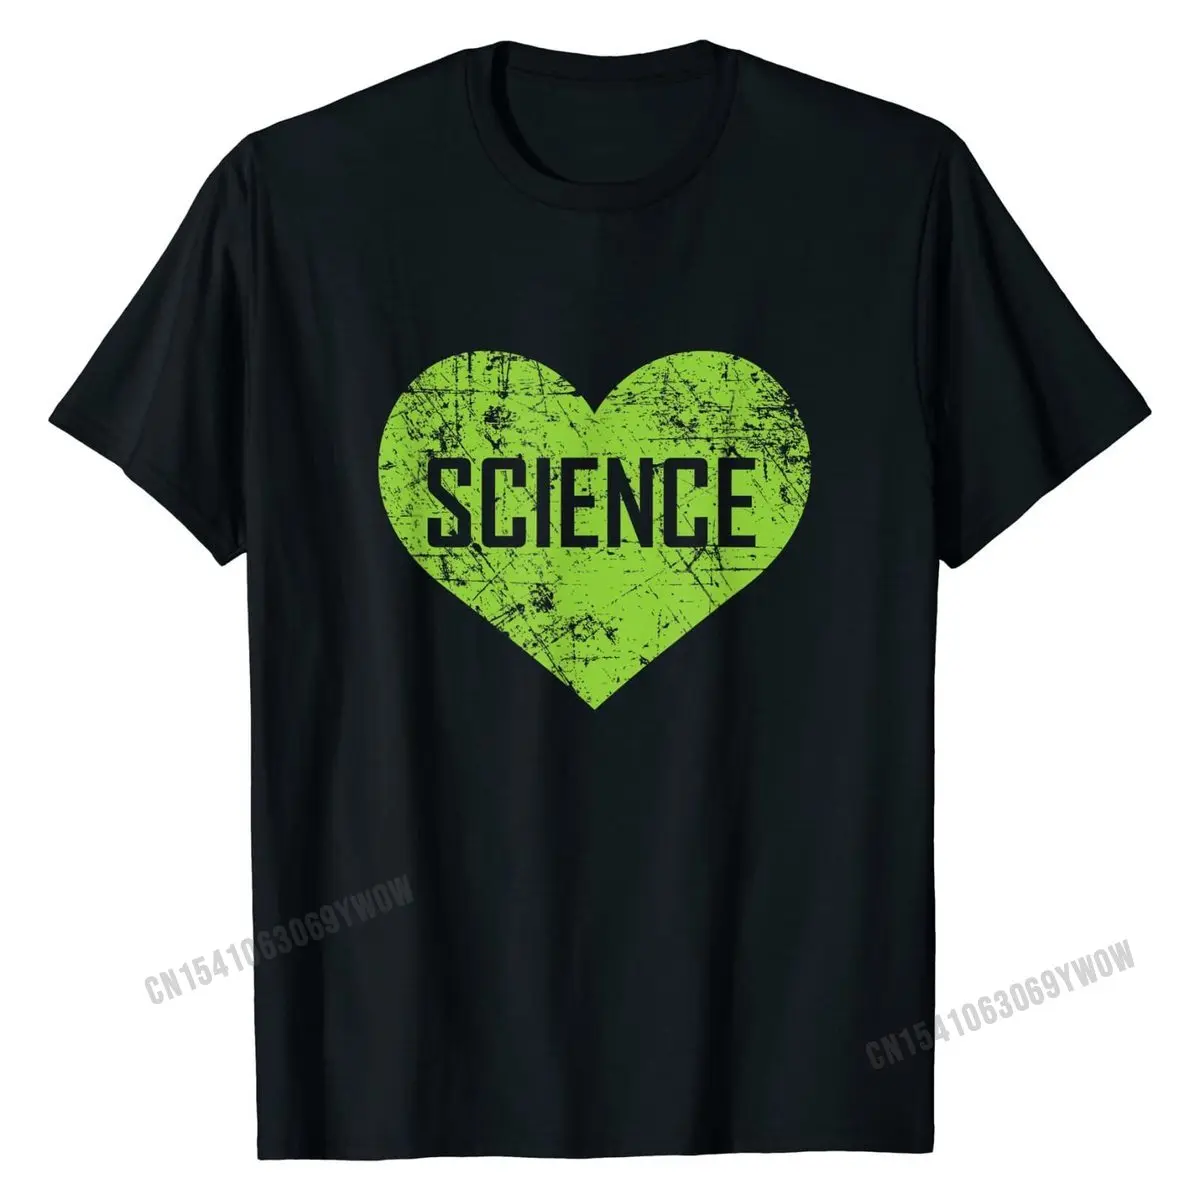 

I Love Science Shirt, Funny Cute Text Green Heart Gift Tshirts Design Classic Student Tops T Shirt Design Cotton